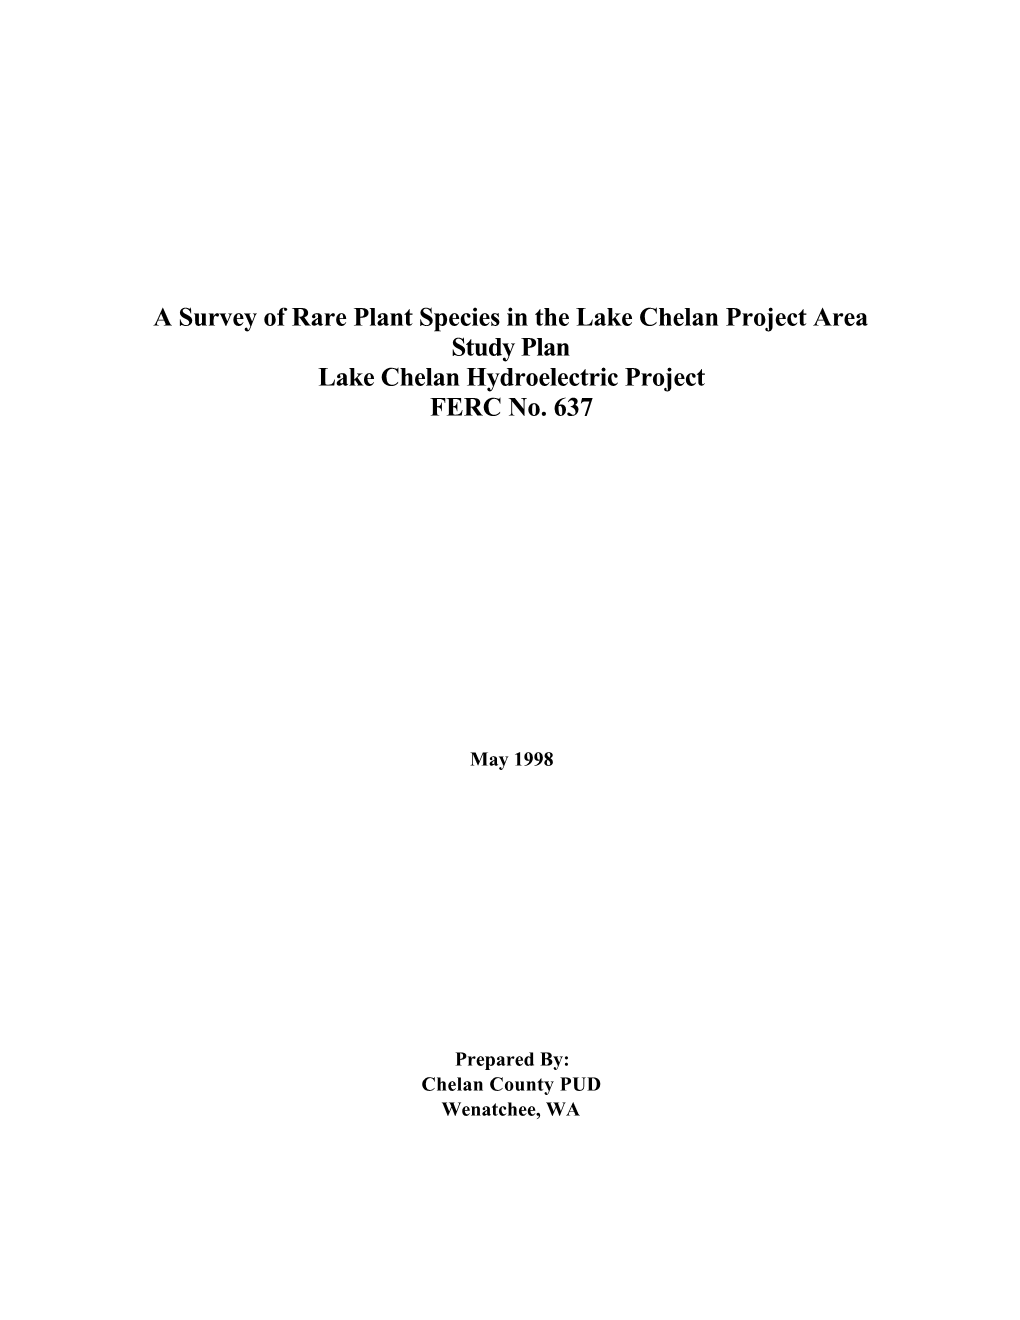 A Survey of Rare Plant Species in the Lake Chelan Project Area Study Plan Lake Chelan Hydroelectric Project FERC No. 637